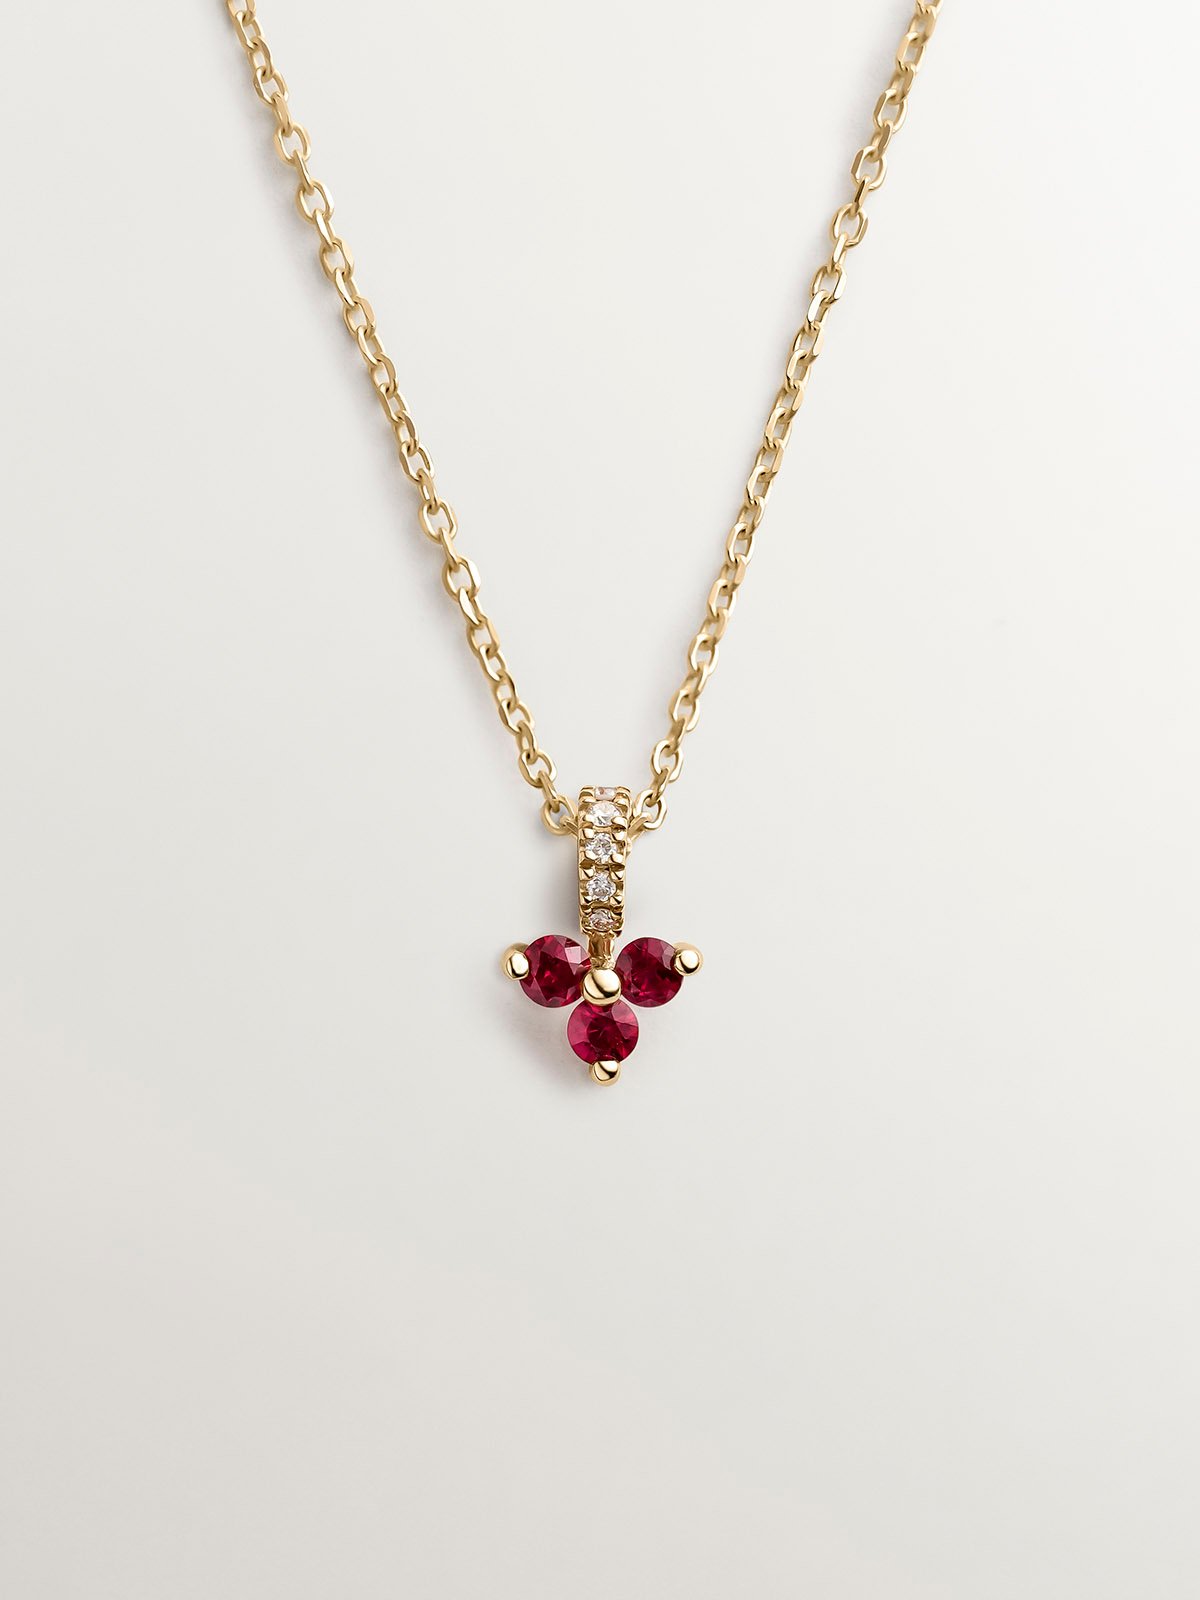 9K Yellow Gold Pendant with Red Ruby Clover and Diamonds